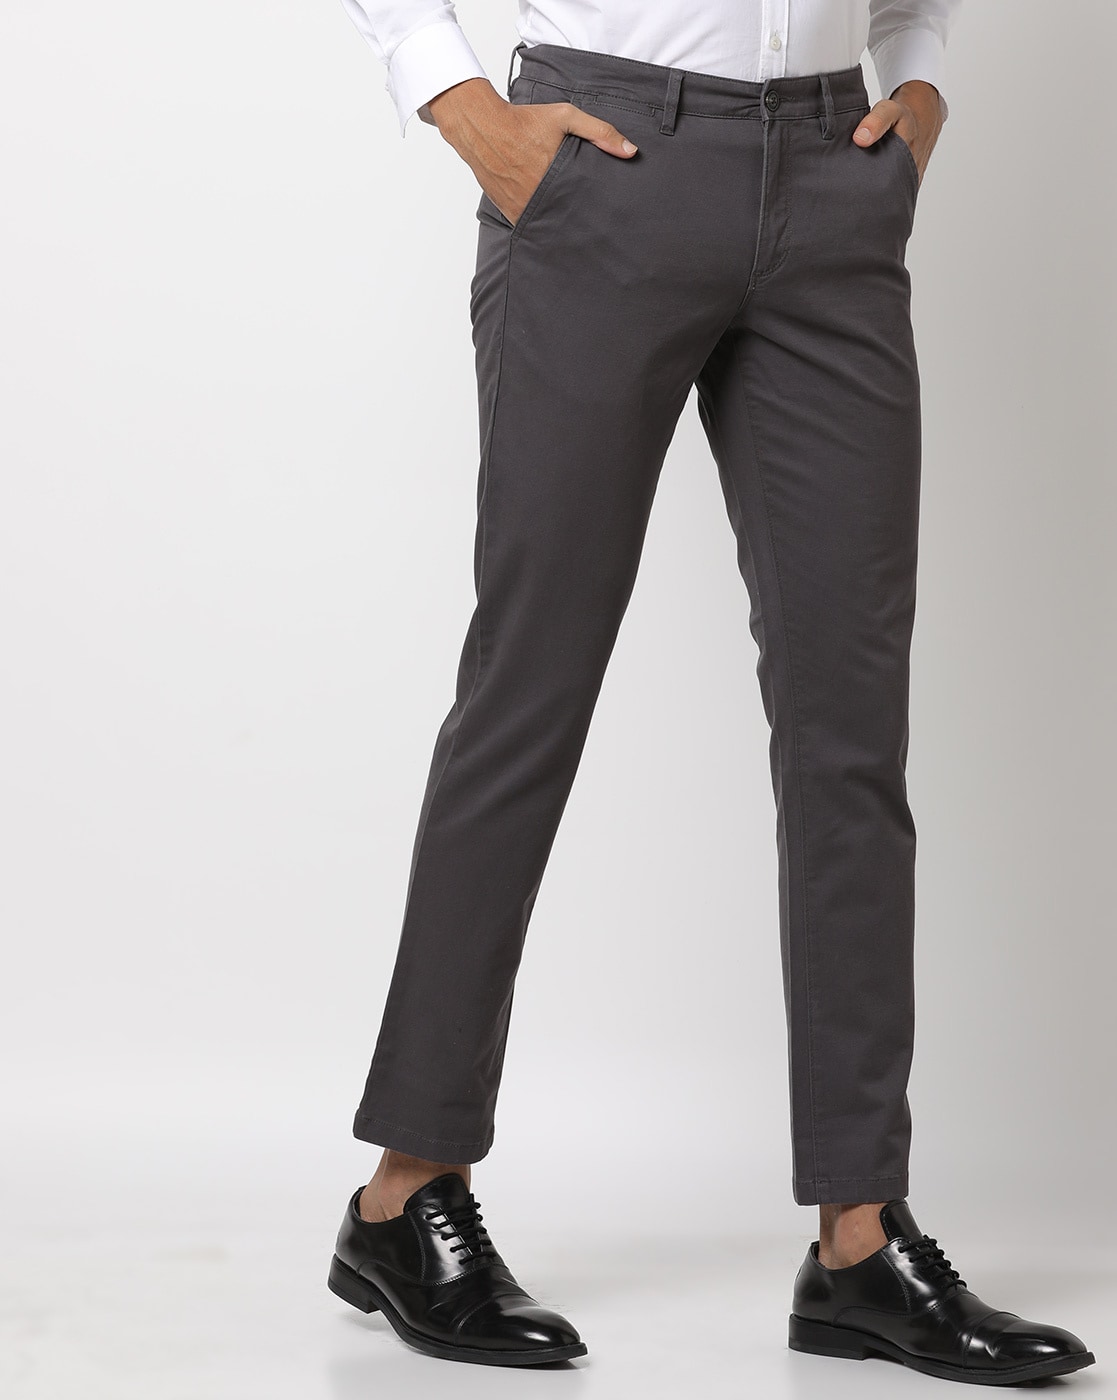 O'Connell's Pleated Front Worsted Wool Trousers - Charcoal Grey (991-55) -  Men's Clothing, Traditional Natural shouldered clothing, preppy apparel